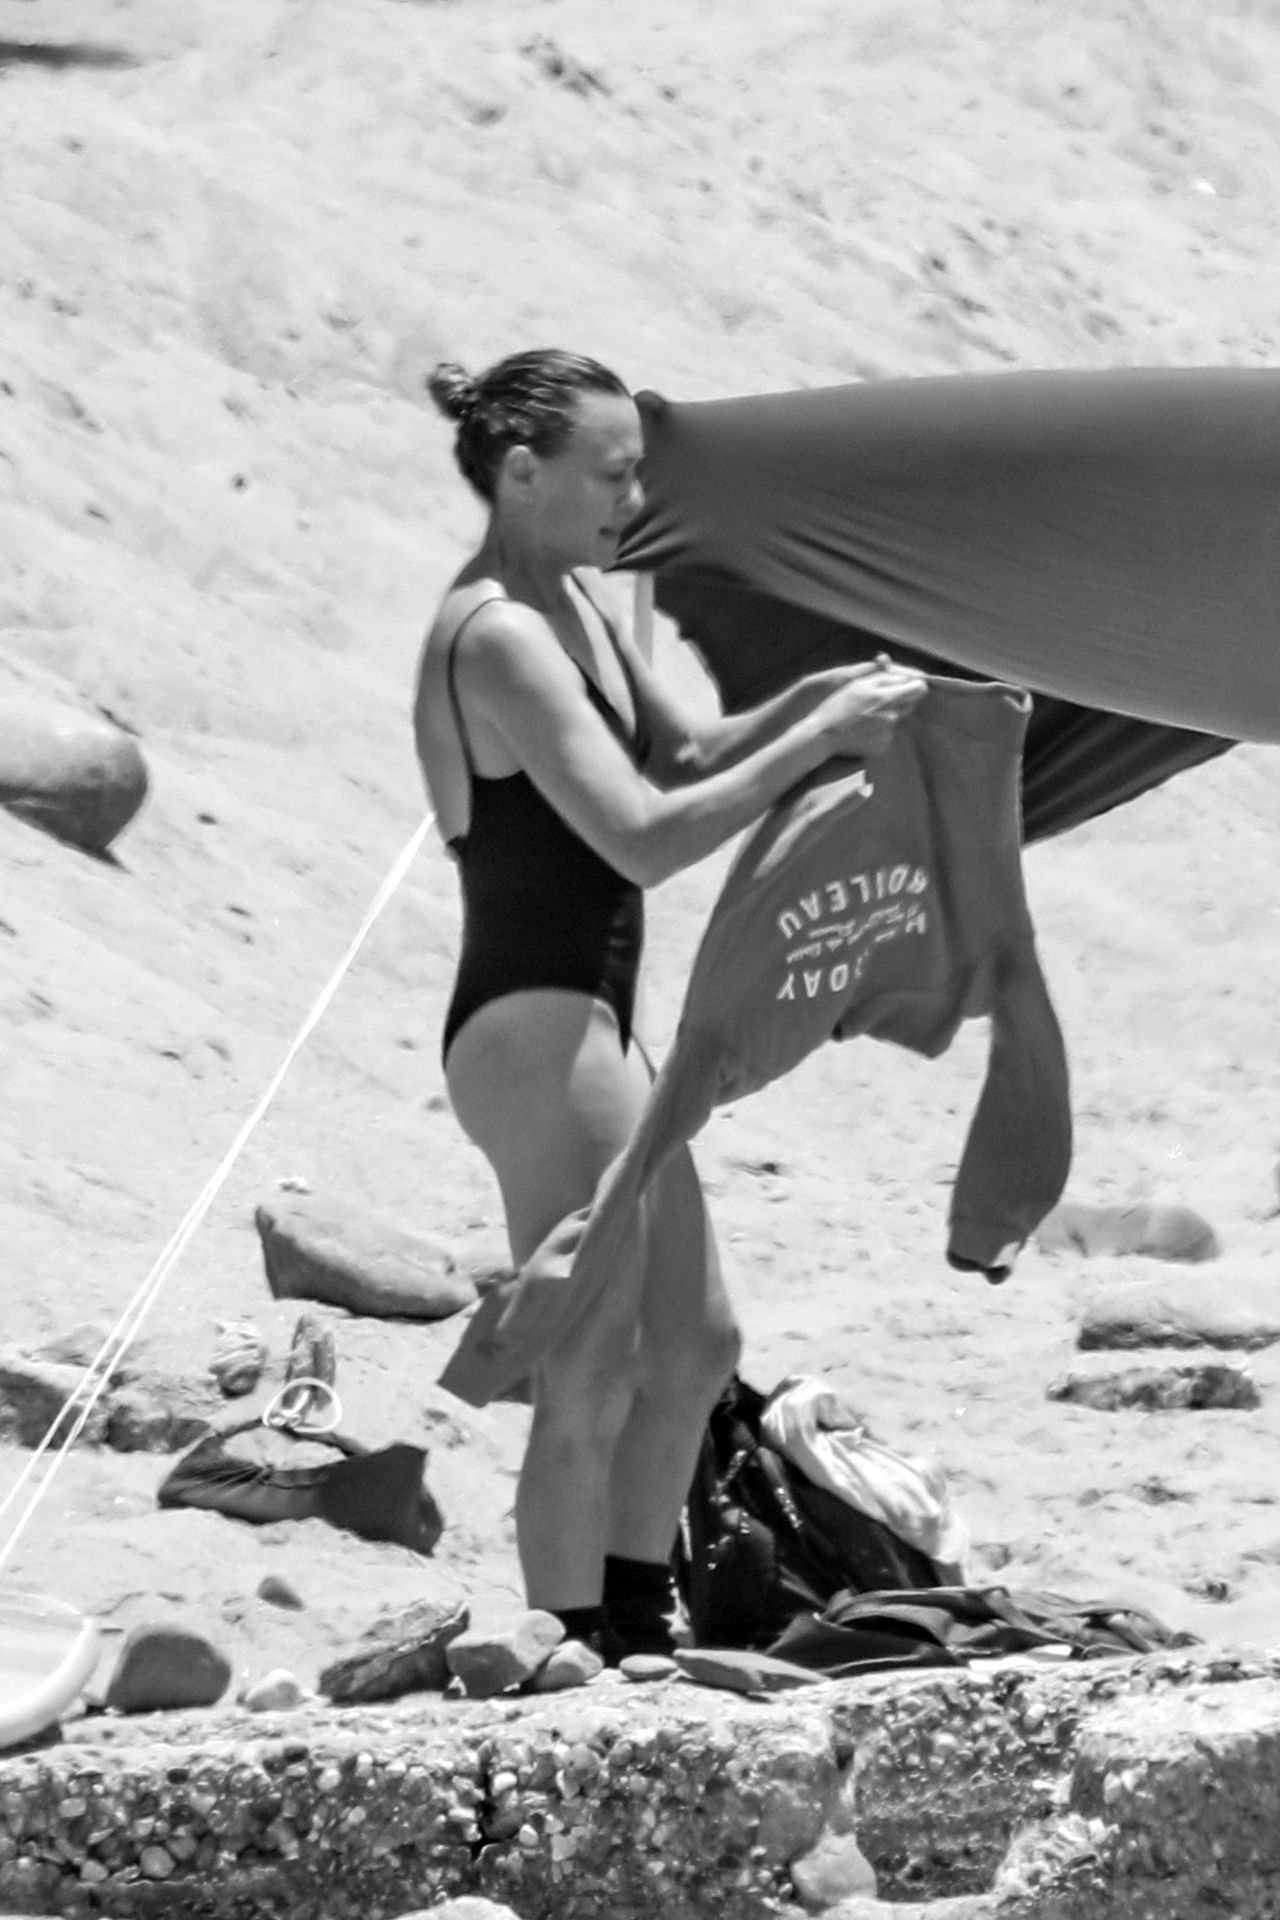 Robin Wright & Clemen
t Giraudet are a Surfing Couple (91 Photos)